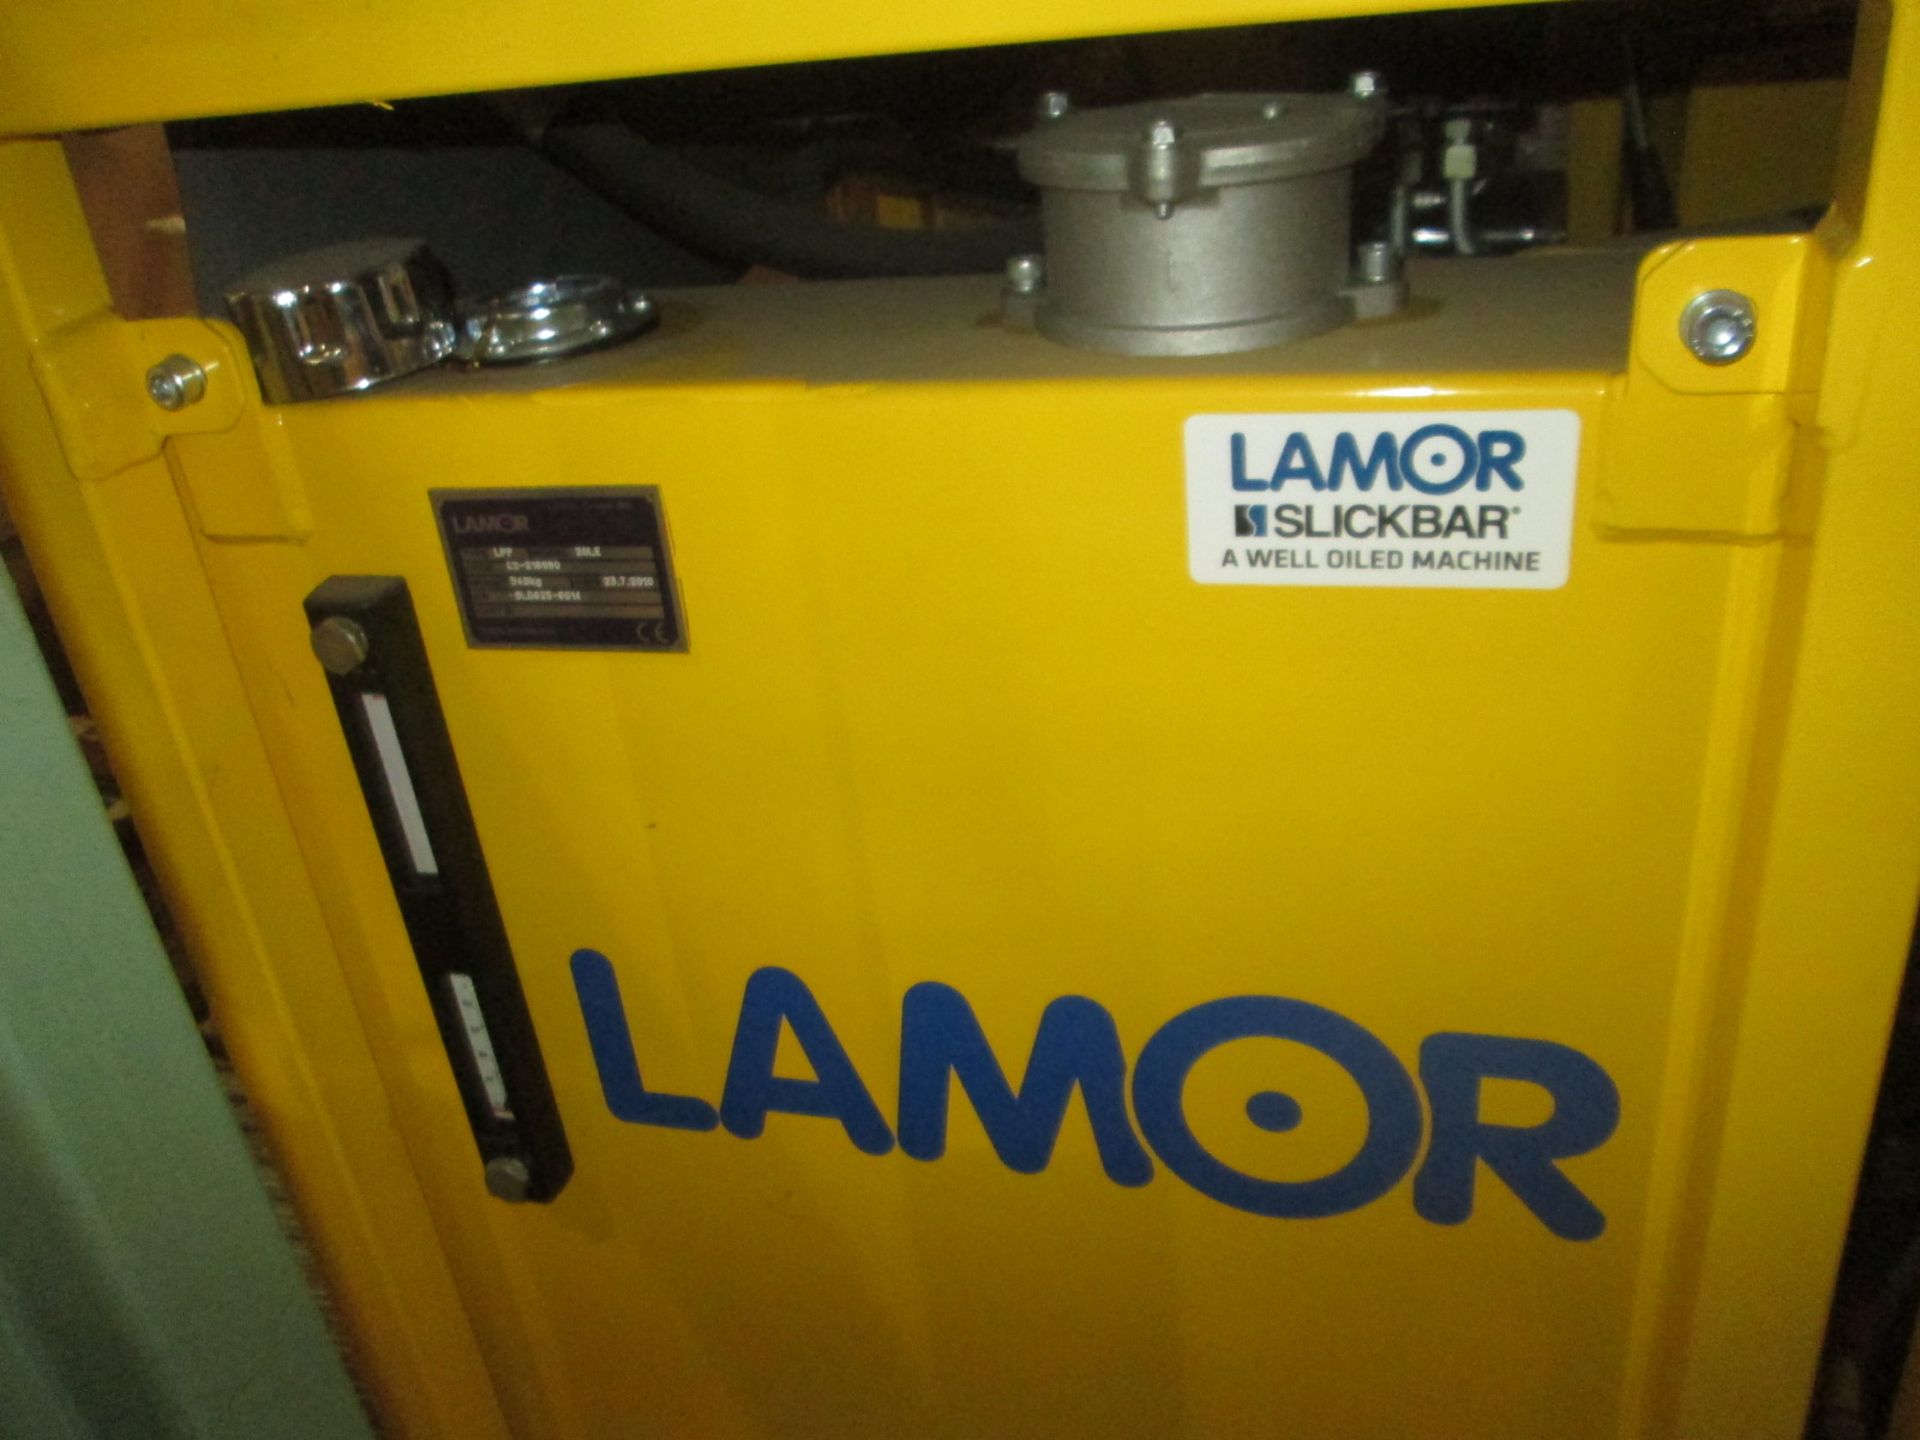 LAMOR SLICKBAR LPP 20 ENCLOSED HYDRAULIC POWER PACK WITH LOMBARDINI DIESEL ENGINE AND ELECTRIC START - Image 2 of 2